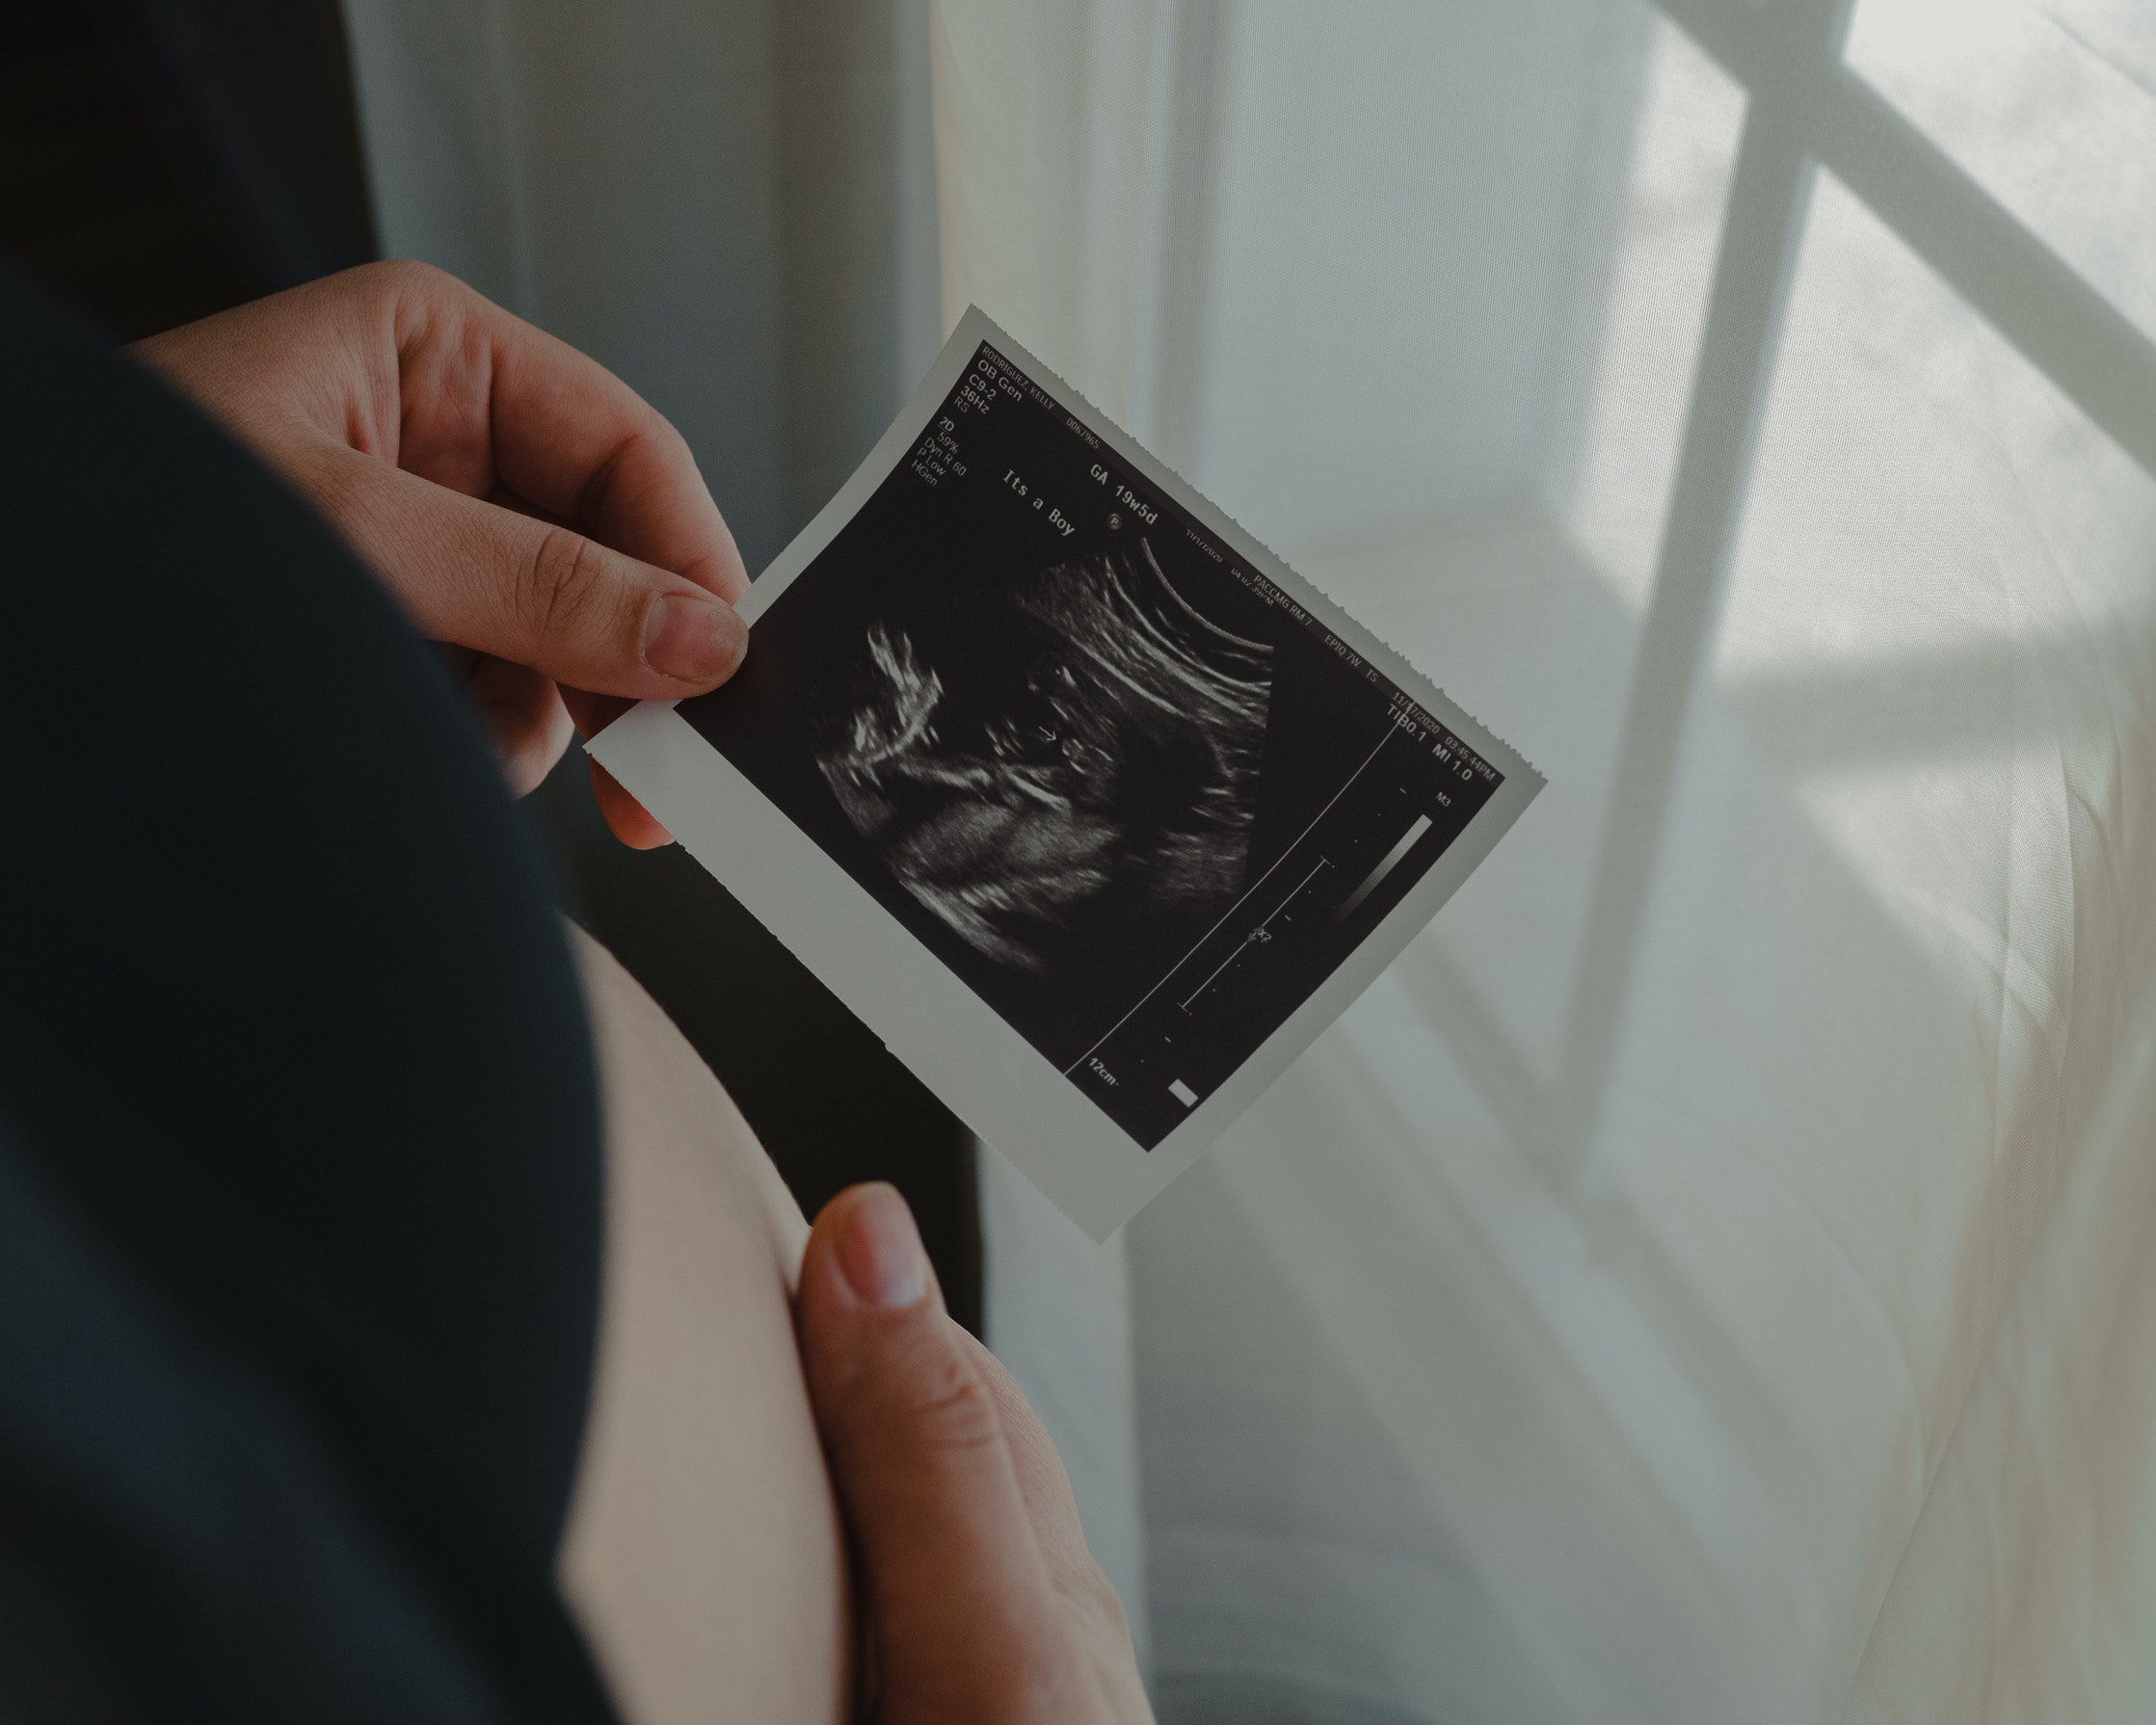 Abortion, Personhood, and the Beginning of Life